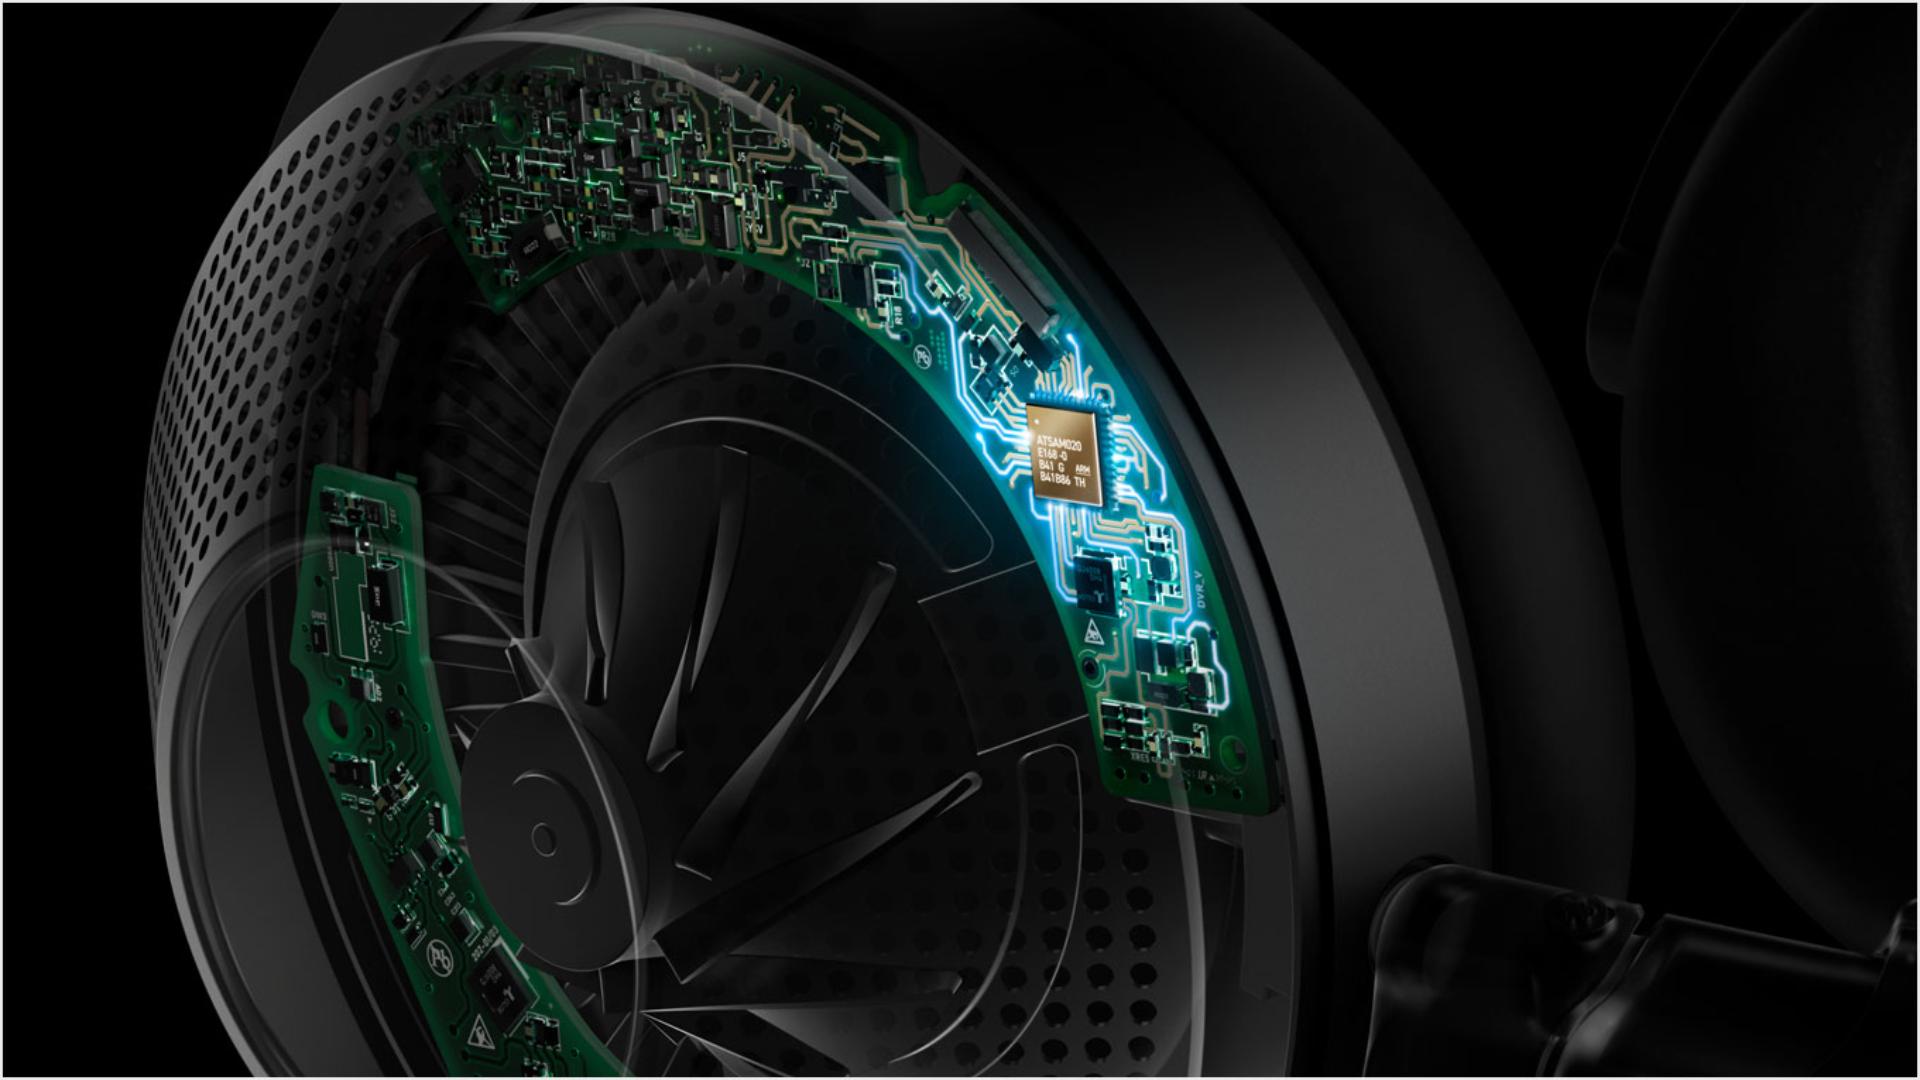 A close-up graphic of the inner workings of the headphones